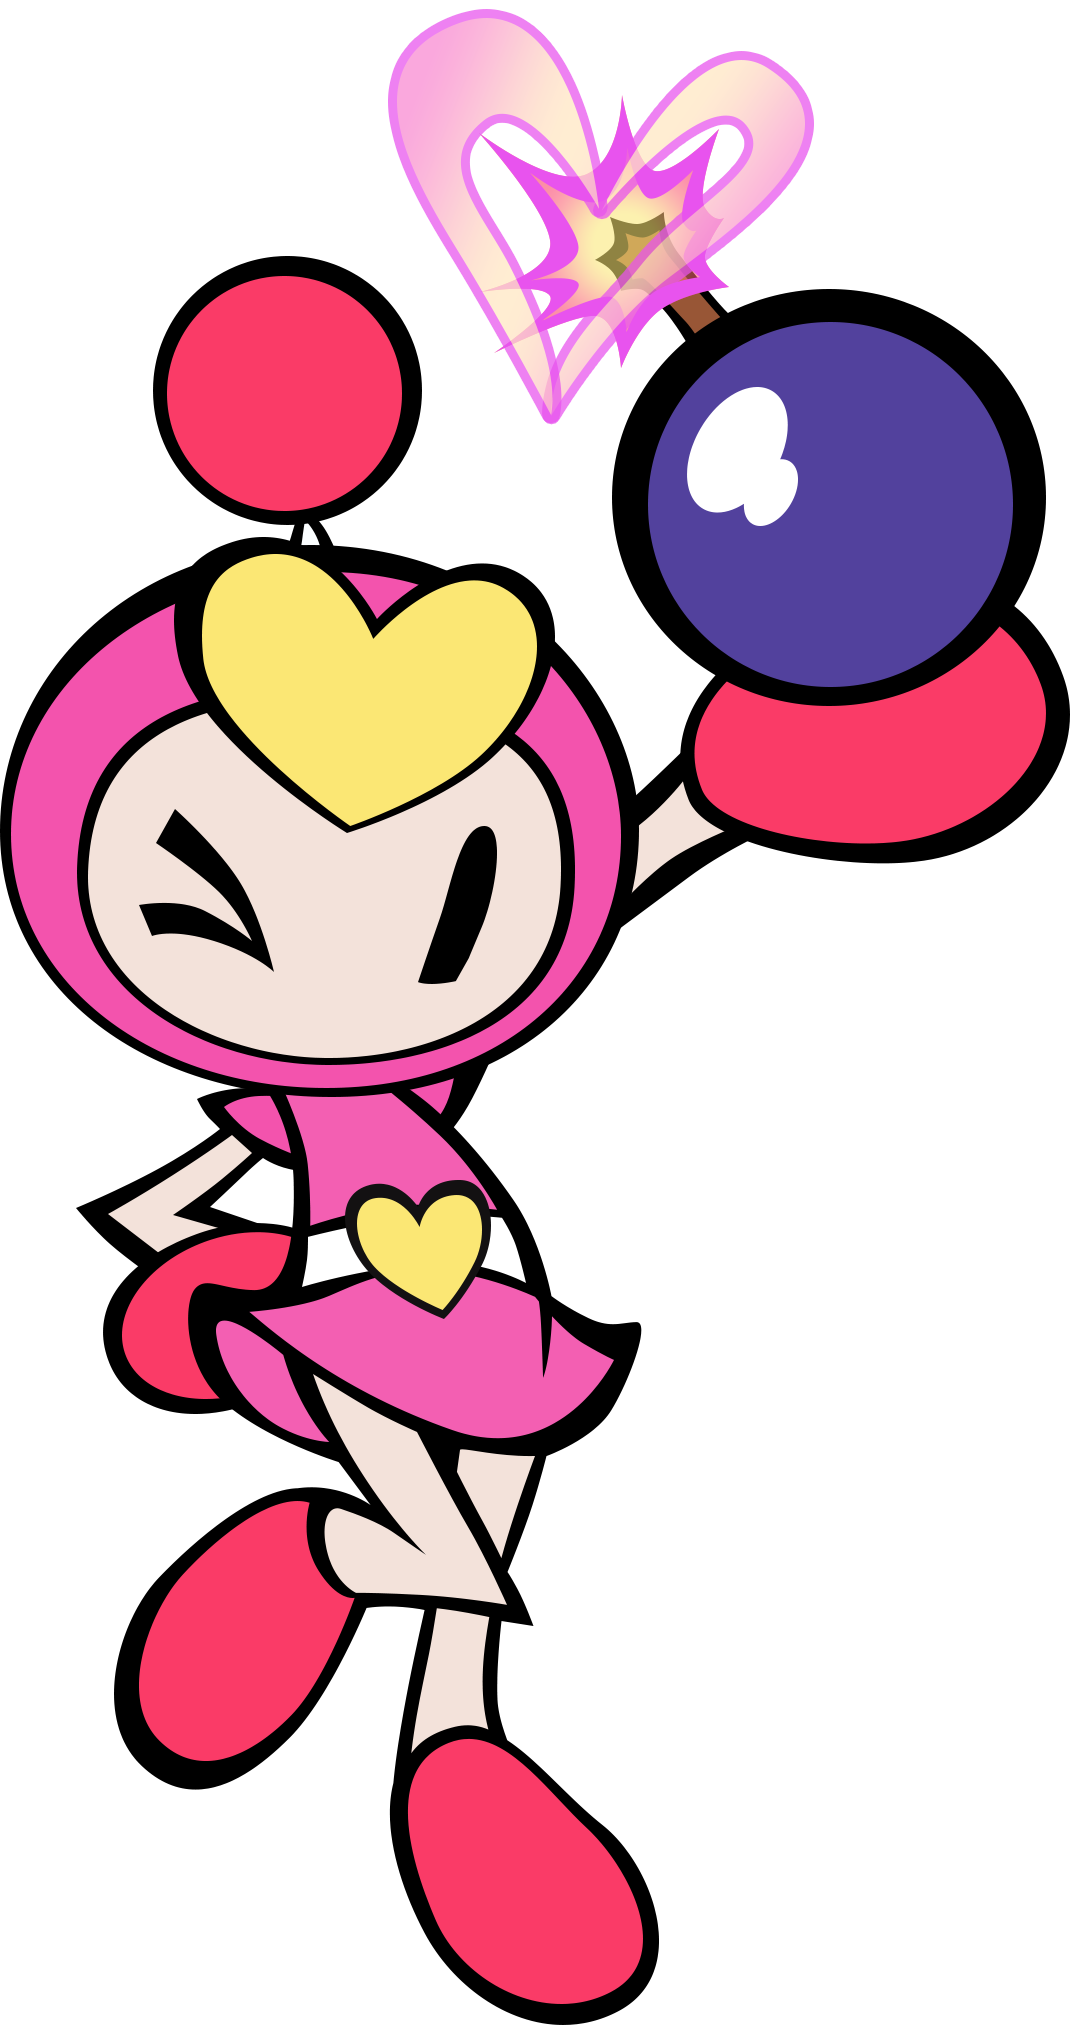 download the new version Bomber Bomberman!